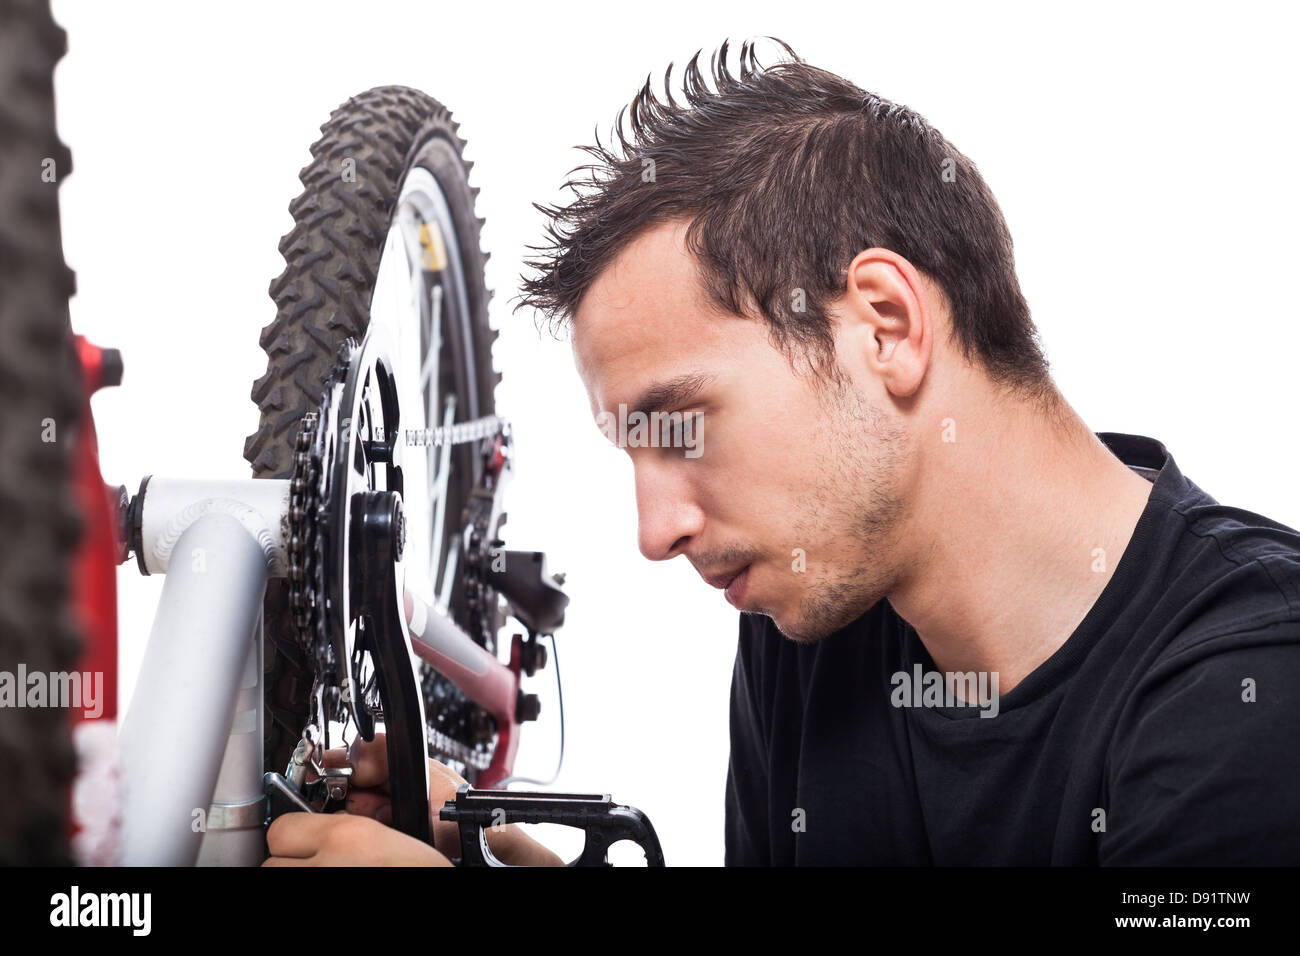 Young man repairing bicycle, isolated on white background Stock Photo